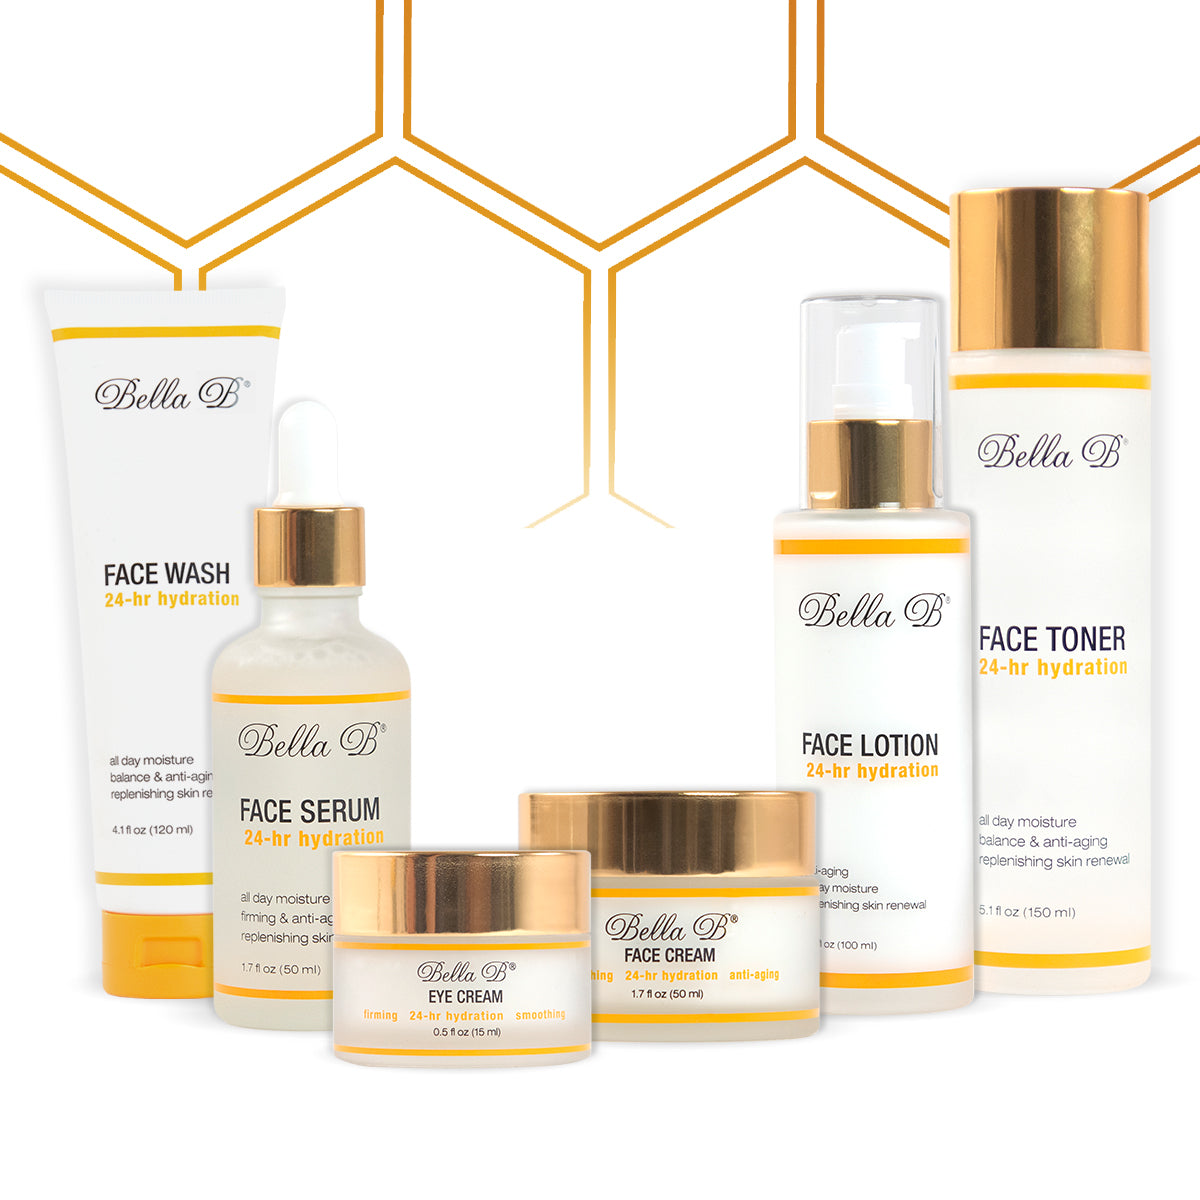 Complete Bella B Skincare Collection for Pregnancy & Beyond